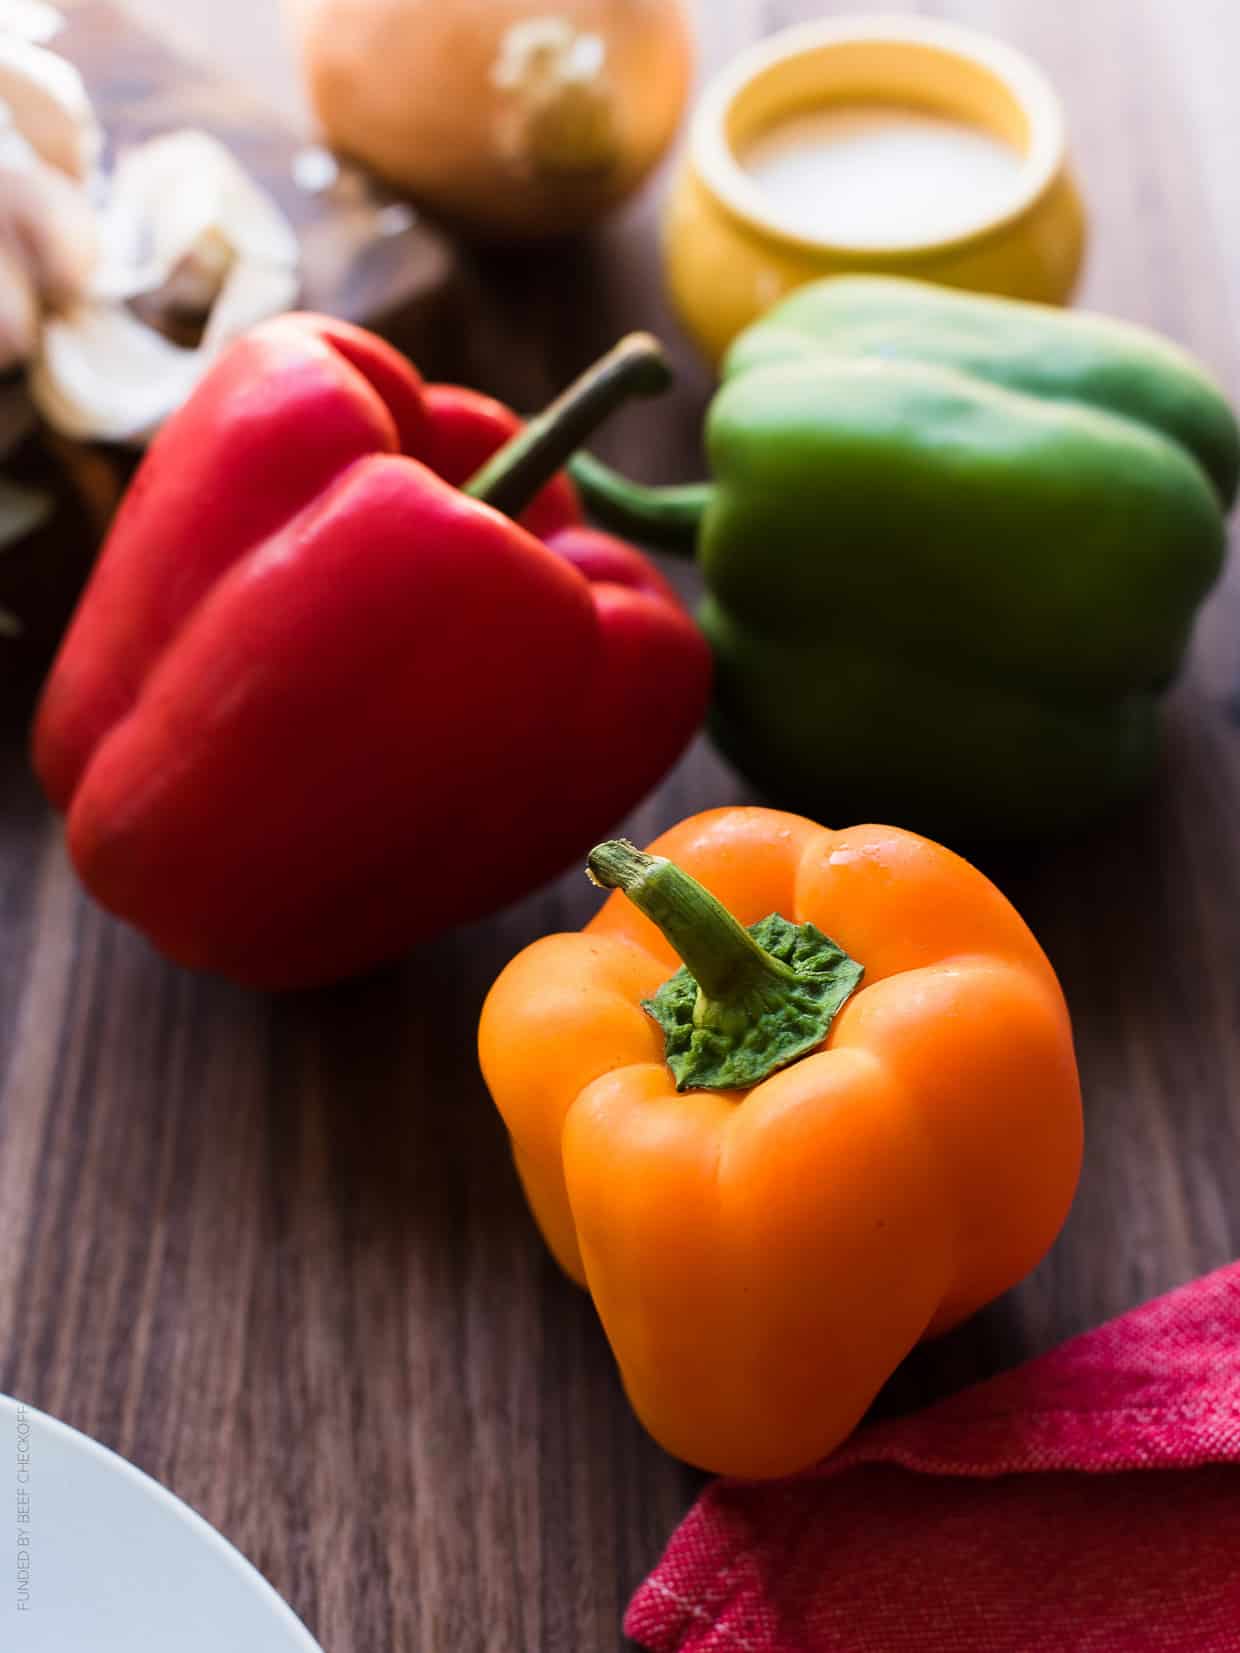 Orange, red, and green bell peppers on a wooden surface.